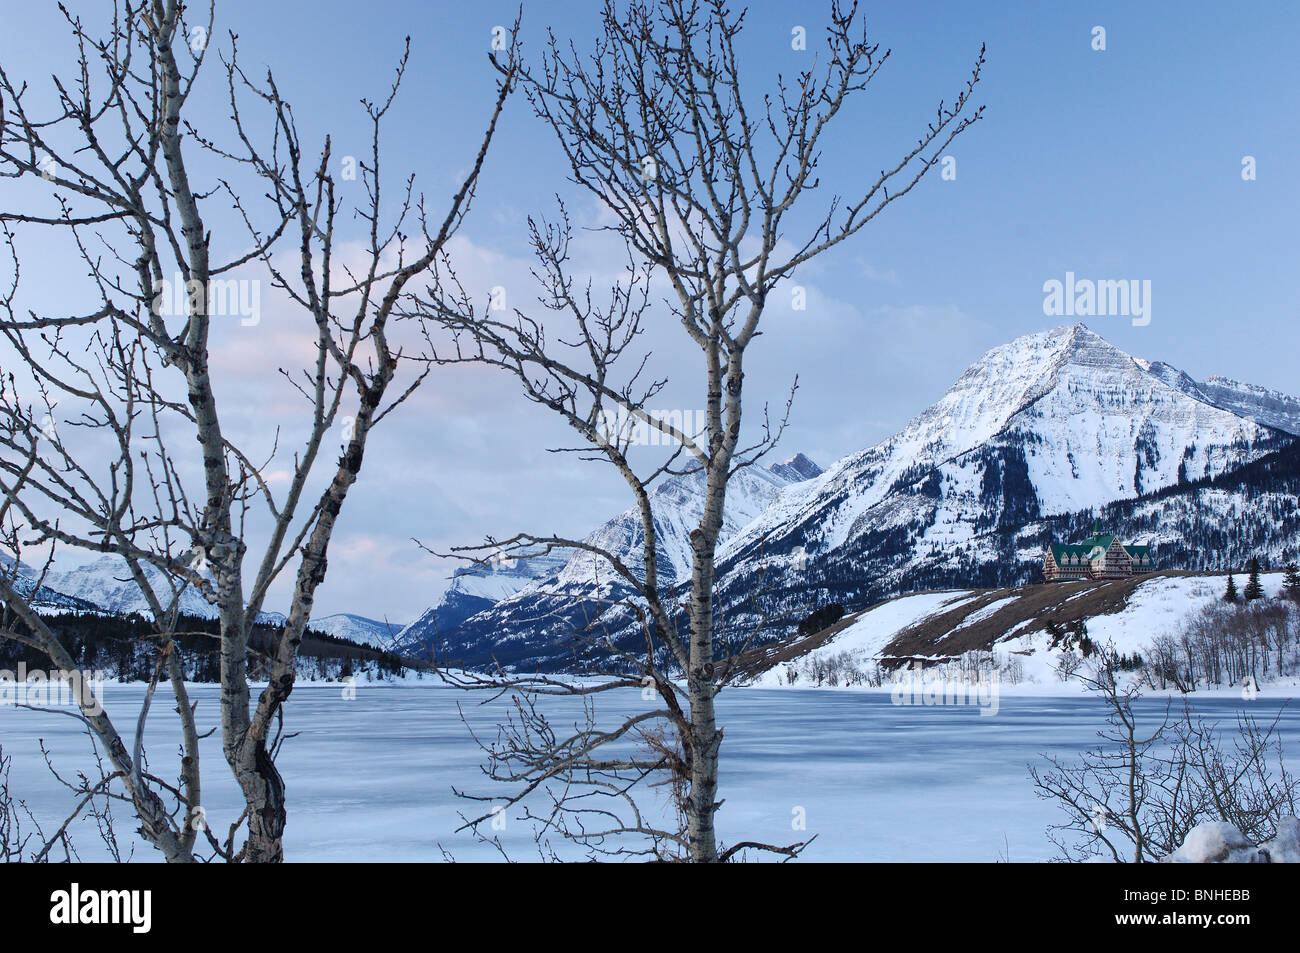 Canada Waterton Alberta Winter Prince Of Wales Hotel Waterton Lakes National Park Landscape Scenery Lake Snow Cold Mountains Stock Photo